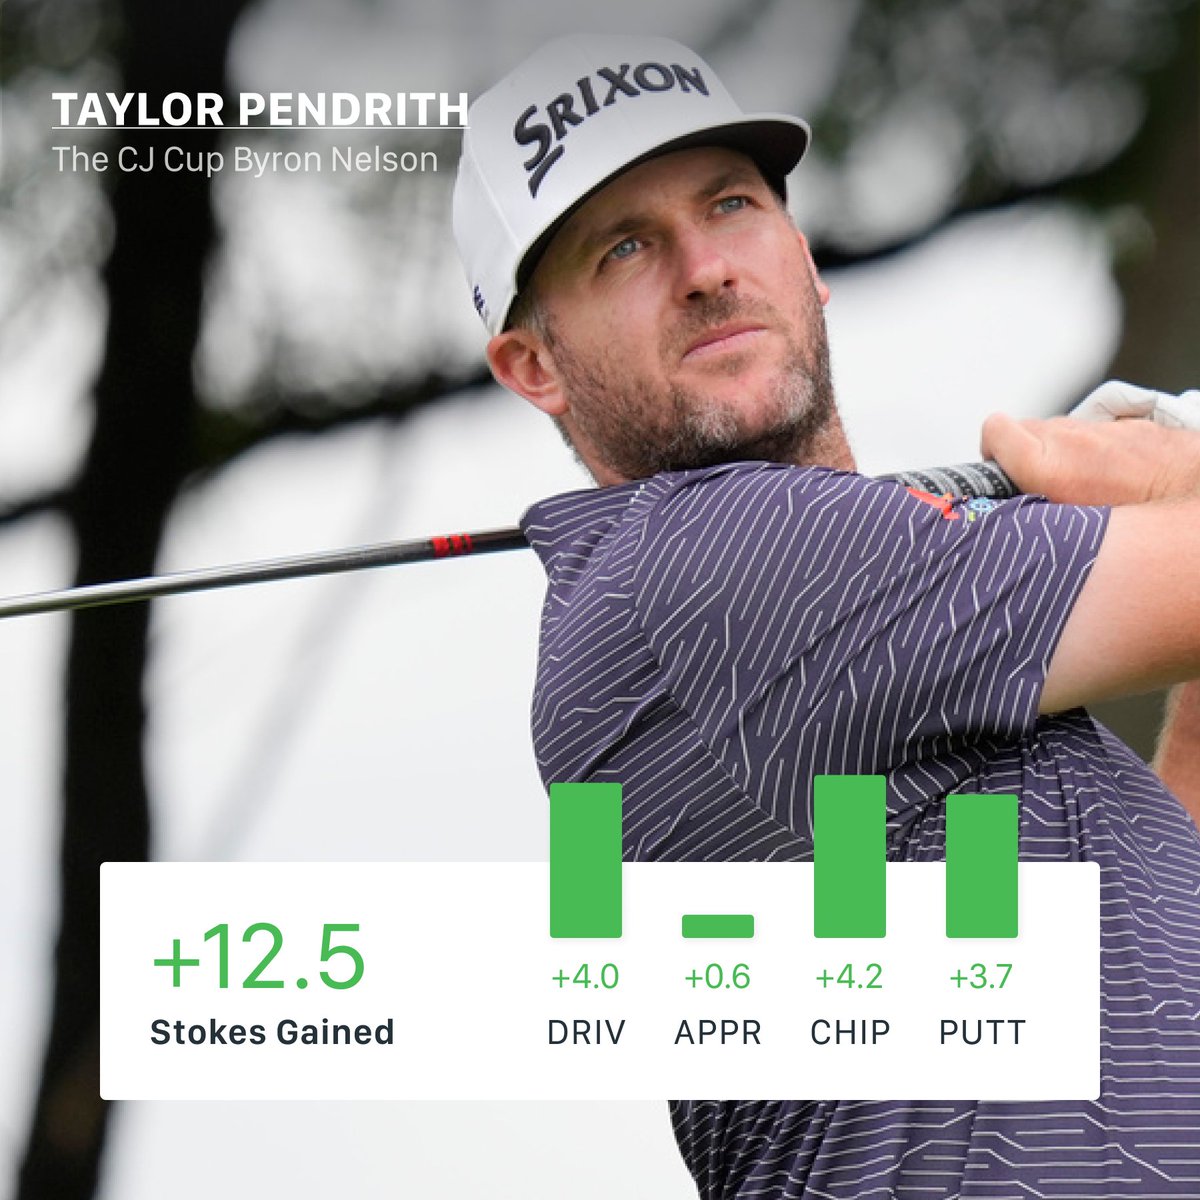 One man's heartbreak is another man's triumph. Expecting to have a nervy 3-footer to force a playoff, Canada's Taylor Pendrith was faced with the same putt to win. Like he had done all week, he nailed it. A solid driving week was complemented by an exquisite short game, which…